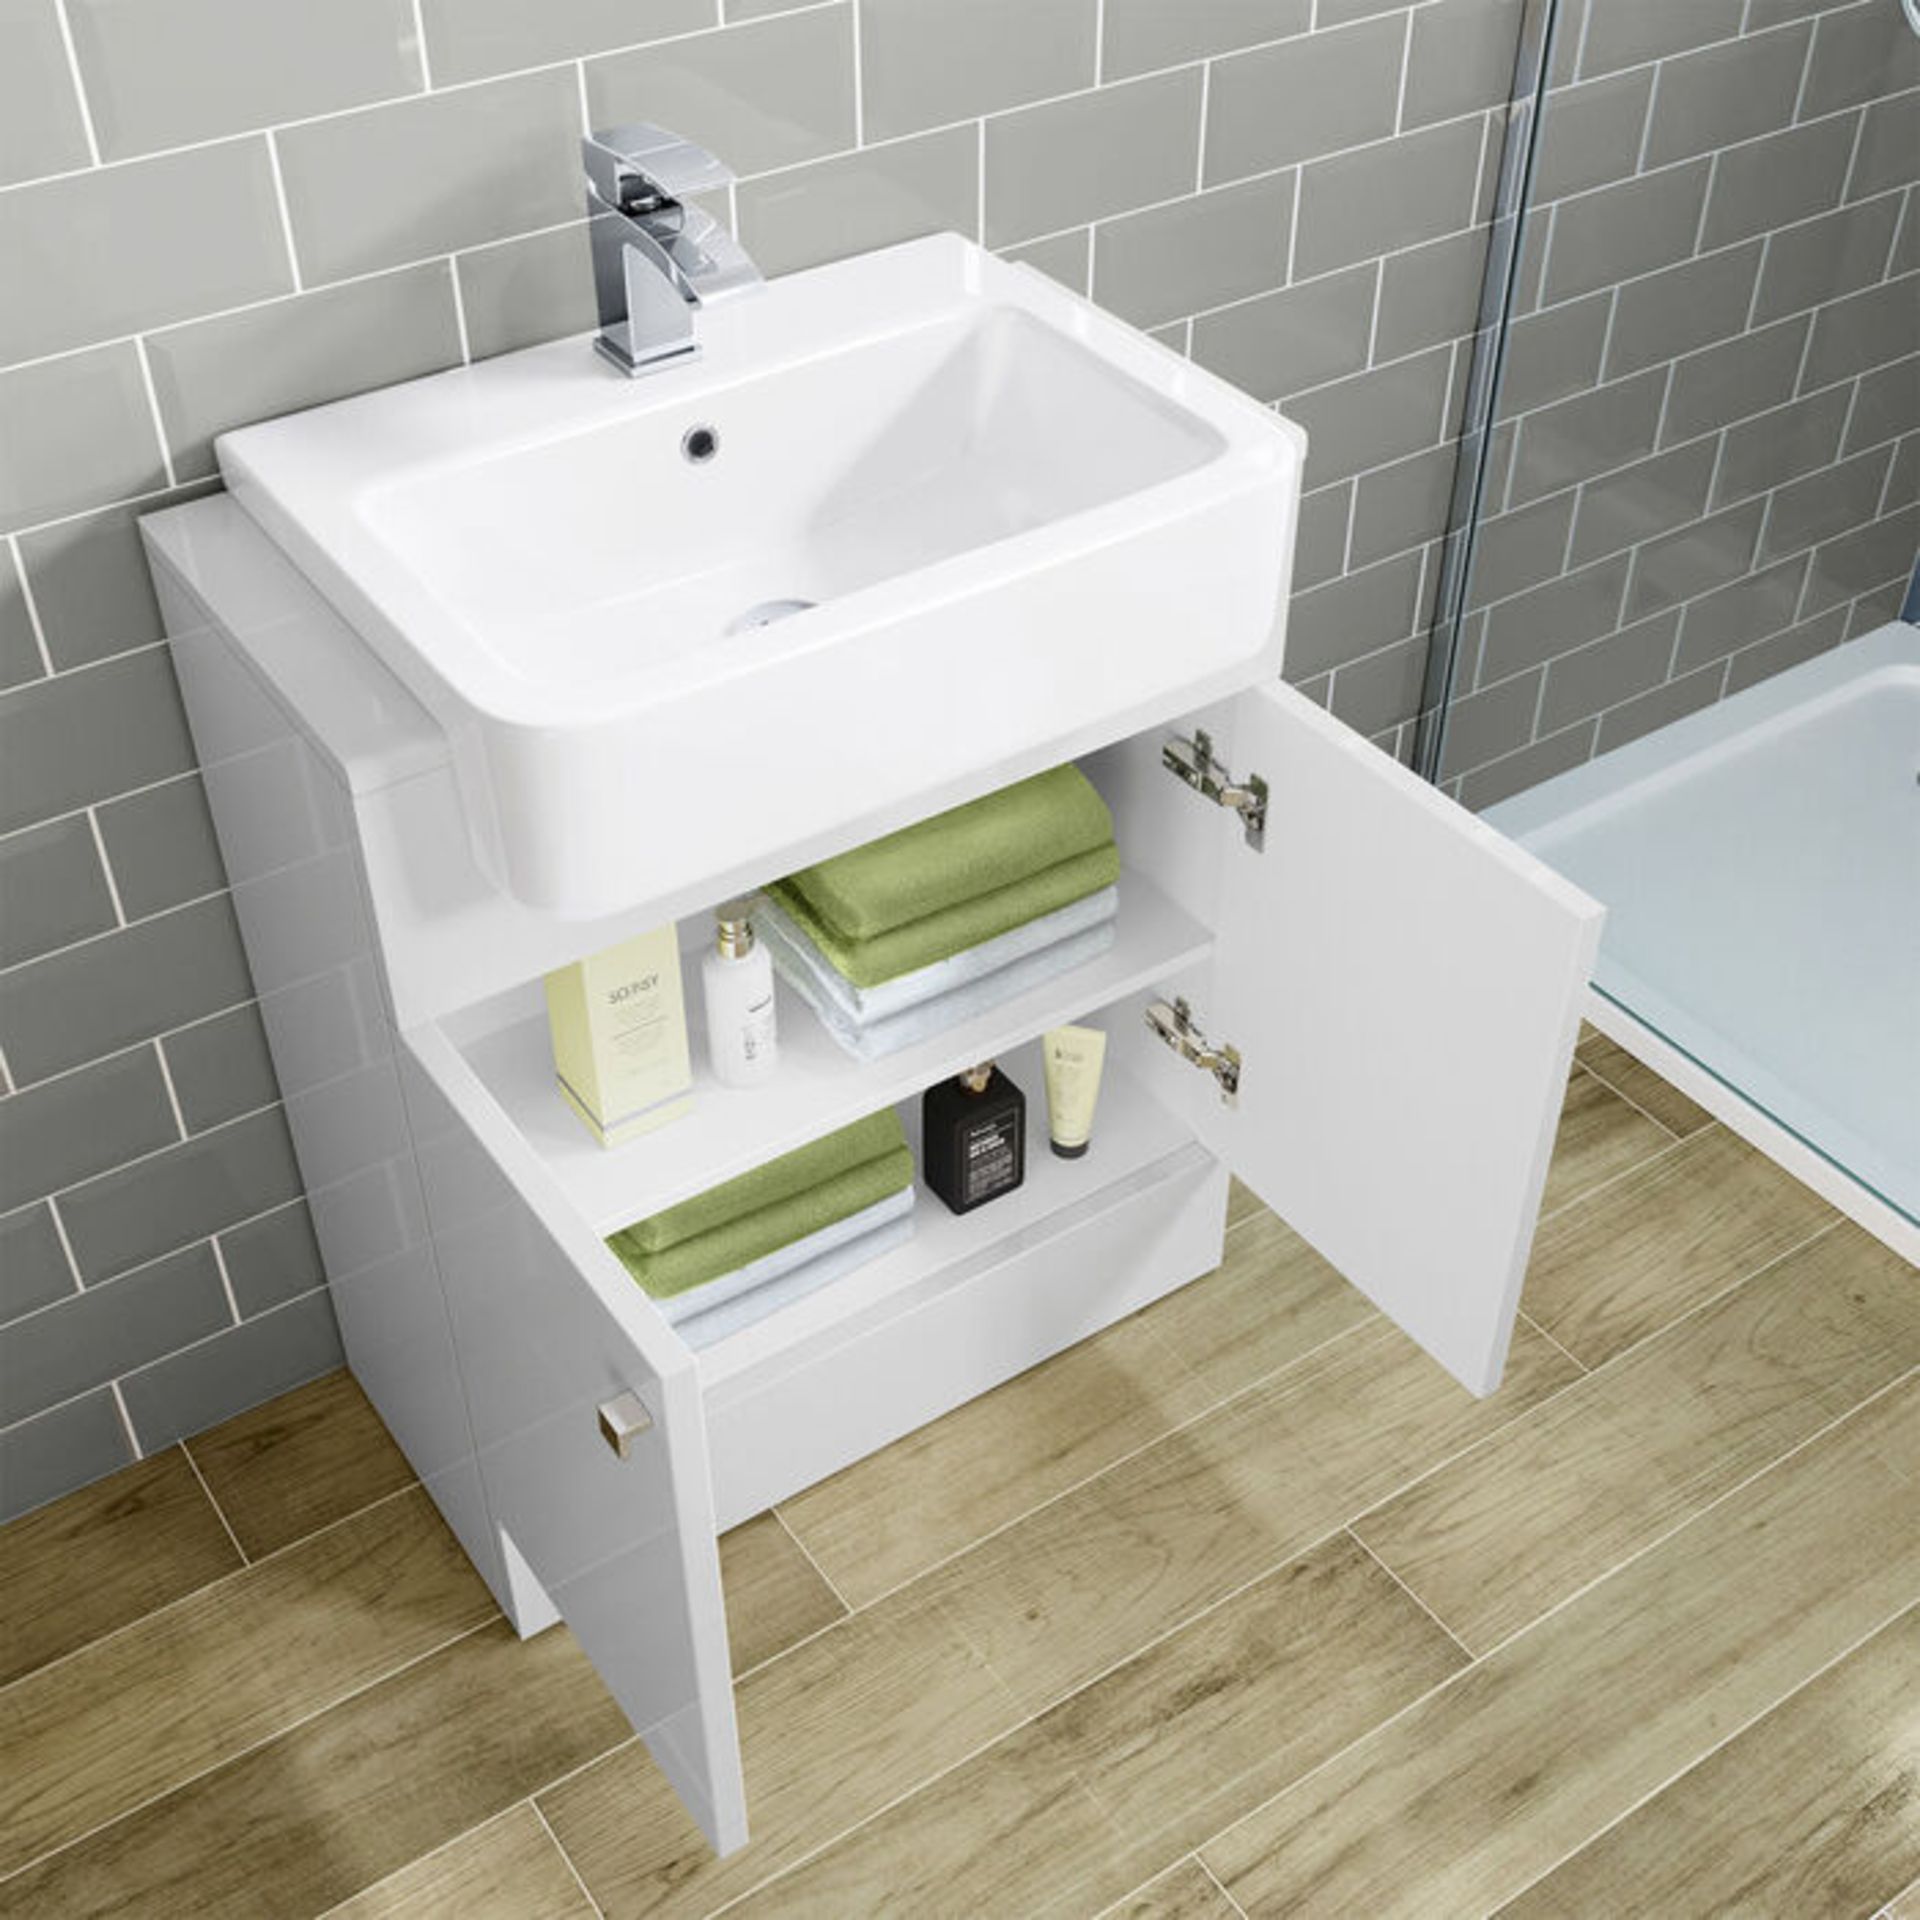 NEW & BOXED 660mm Harper Gloss White Sink Vanity Unit - Floor Standing. RRP £749.99.Comes comp... - Image 2 of 3